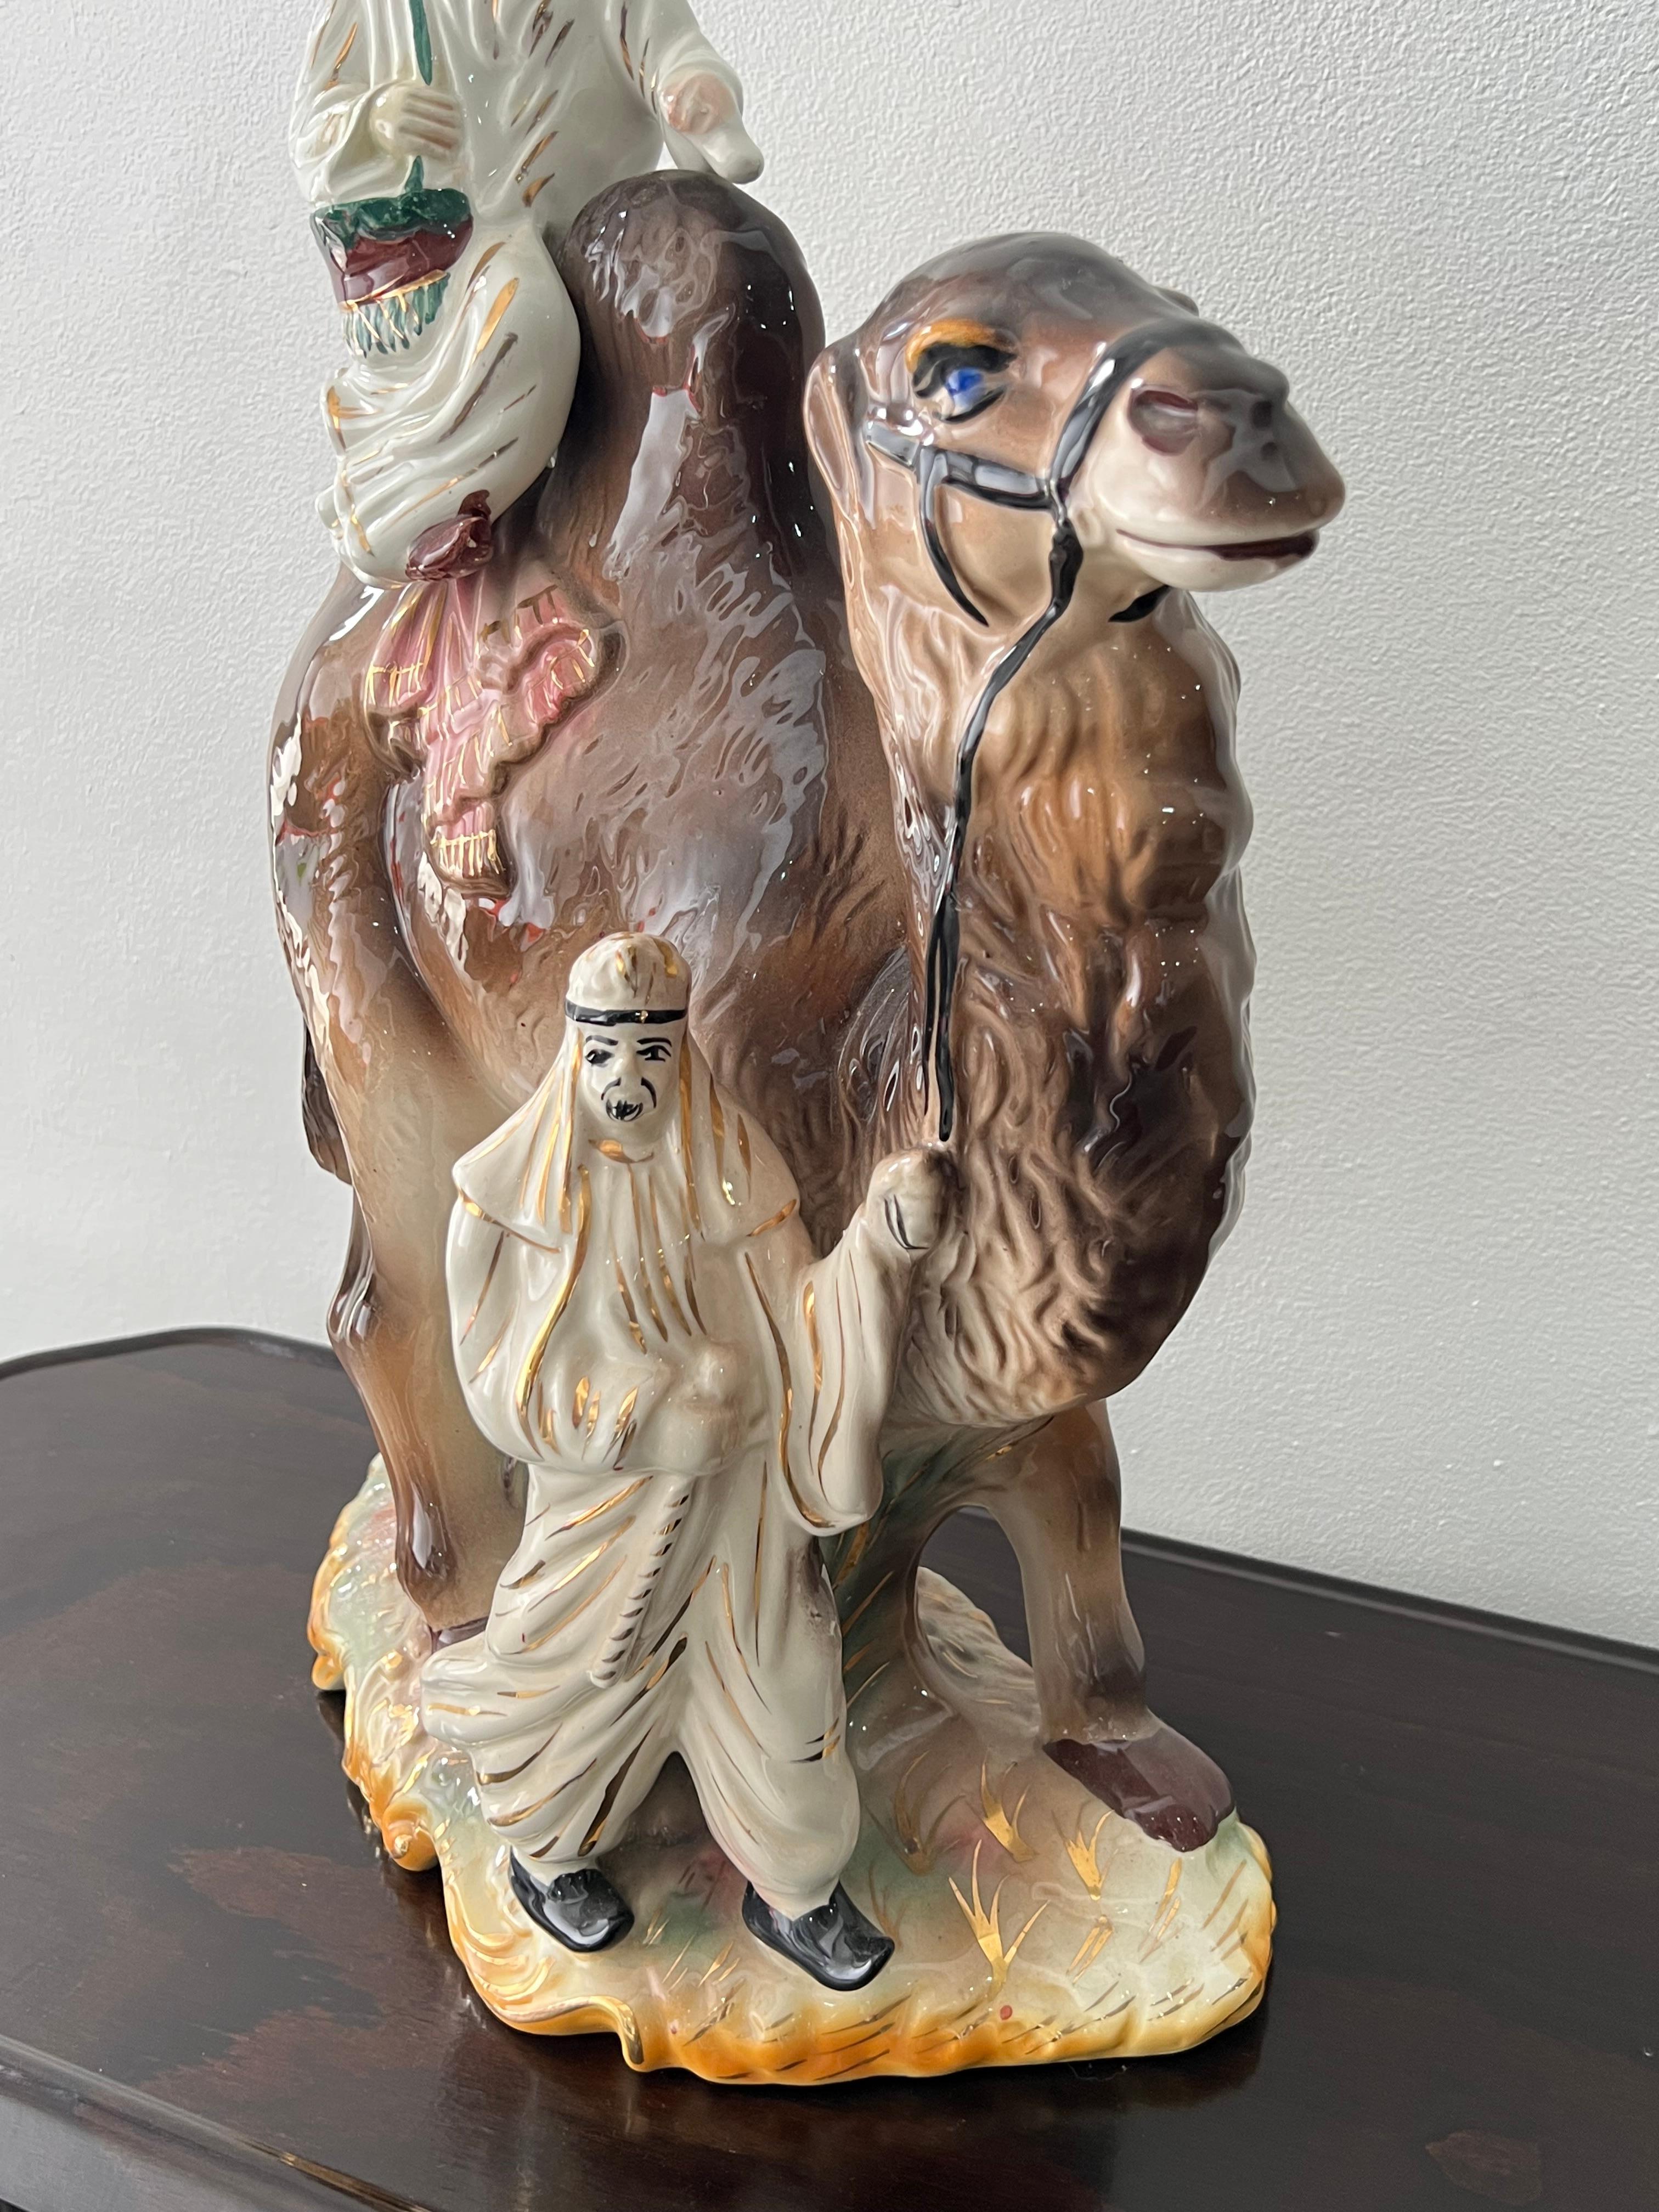 Stunning rare large Capodimonte hand painted porcelain sculpture.

Capodimonte porcelain is a type of Italian porcelain that originated in Naples in the mid-18th century. It is known for its intricate details, soft colors, and delicate beauty.